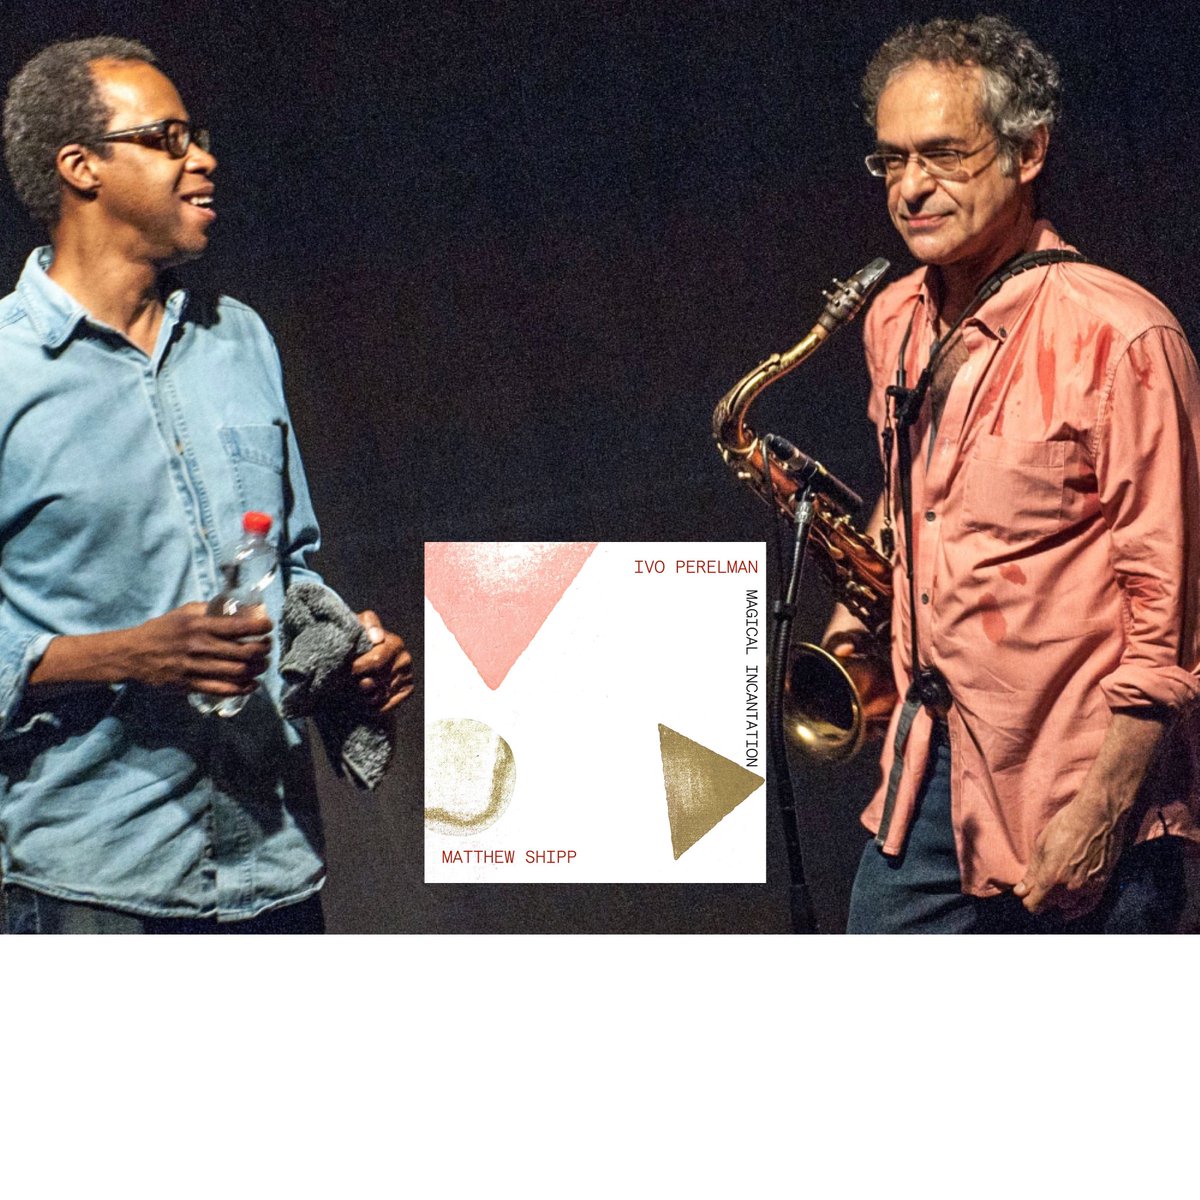 'Perelman and Shipp share one of the telepathic musical connections between two individuals in the history of jazz. You might even call it magic...instantaneous, unfiltered transmission of emotions from head and heart to instrument. It’s musical truth.'
somethingelsereviews.com